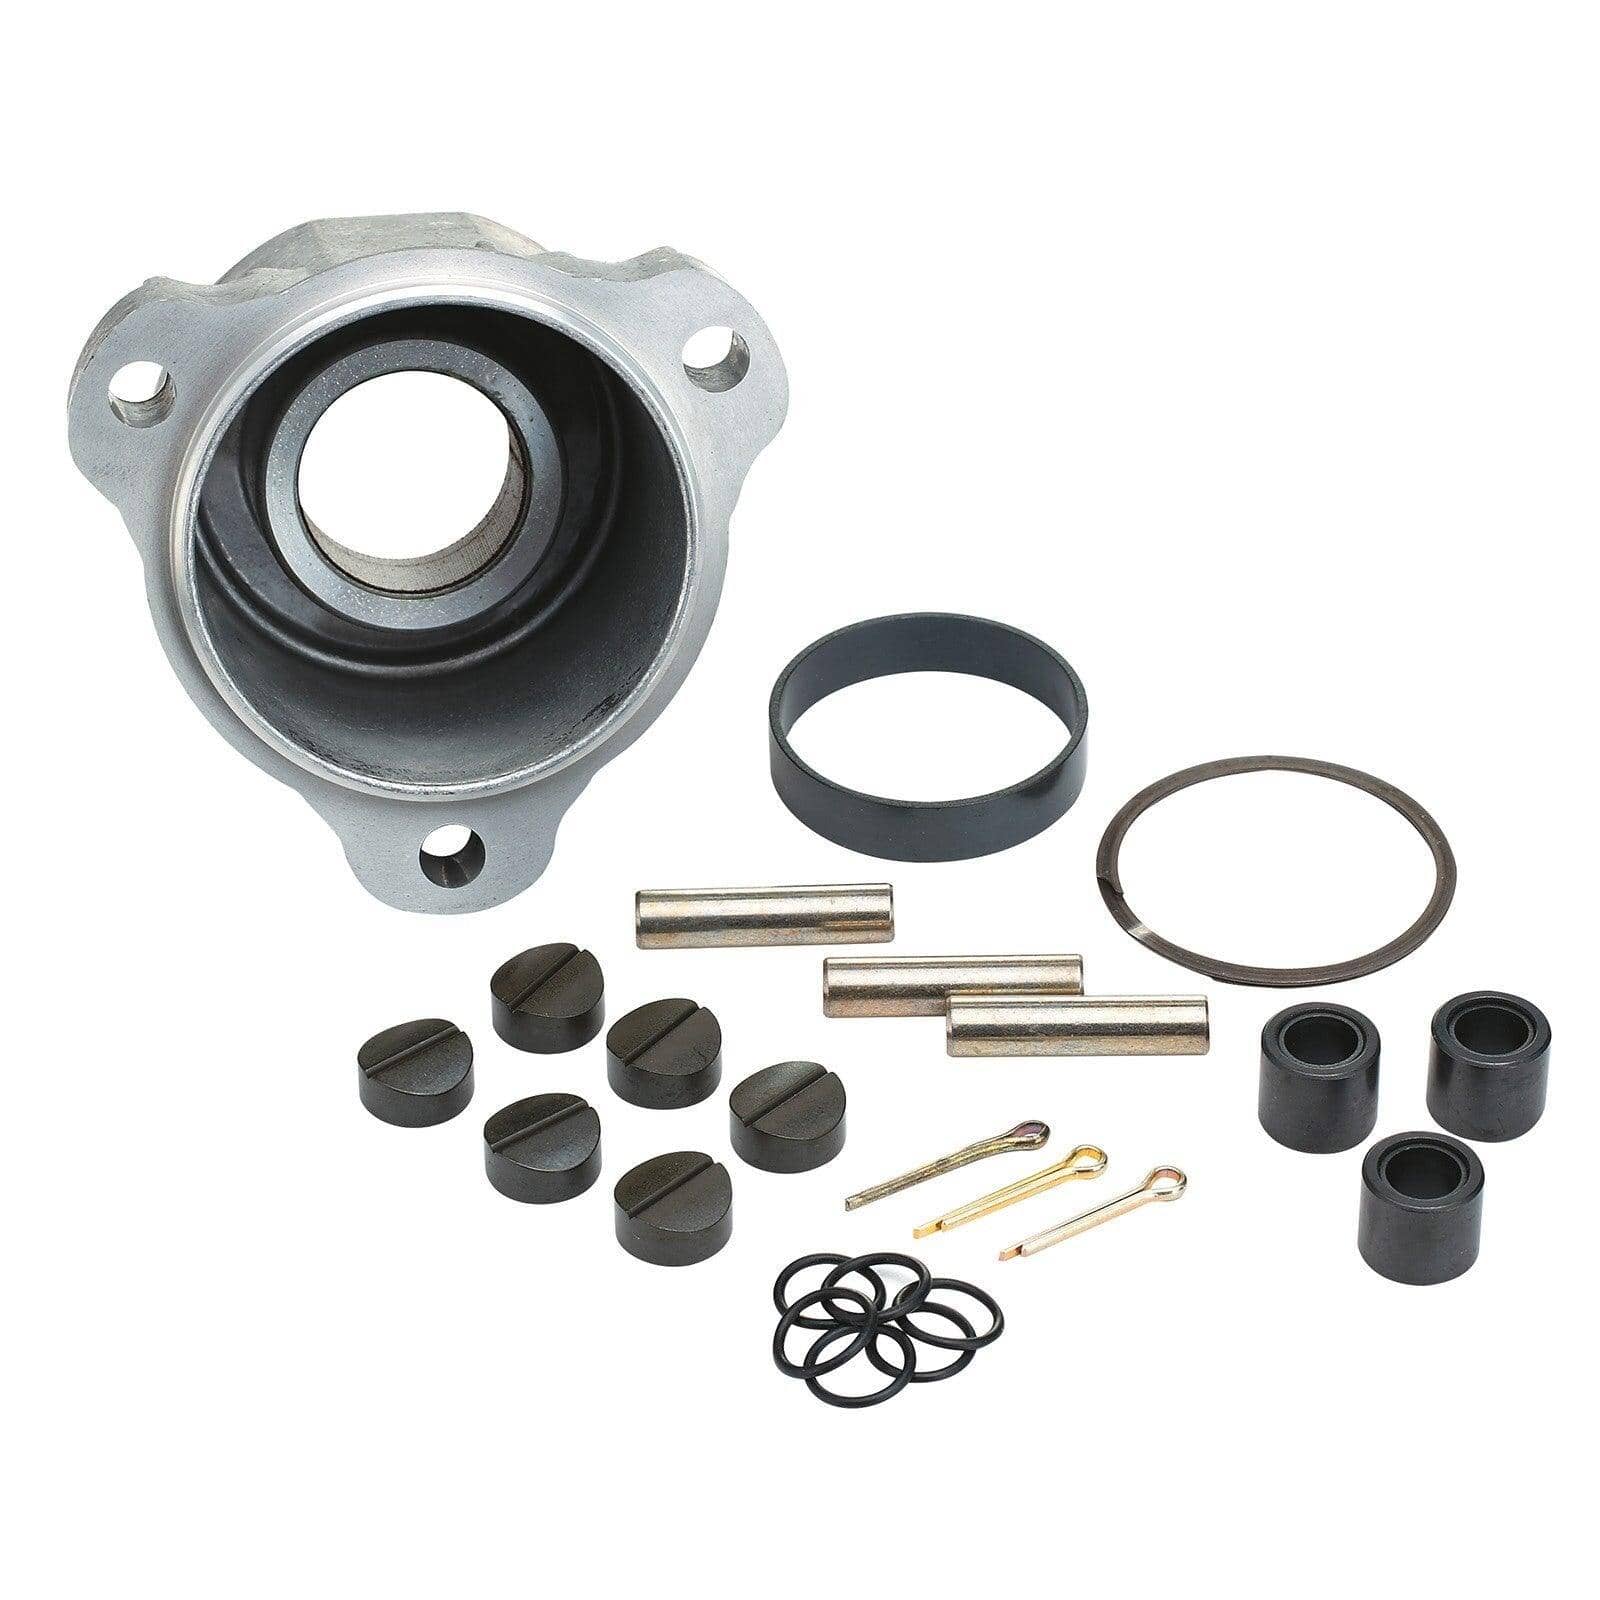 Maintenance Kit for TRA Drive Pulley - 2008 to 2010 (800R P-TEK & 800R E-TEC) - Factory Recreation